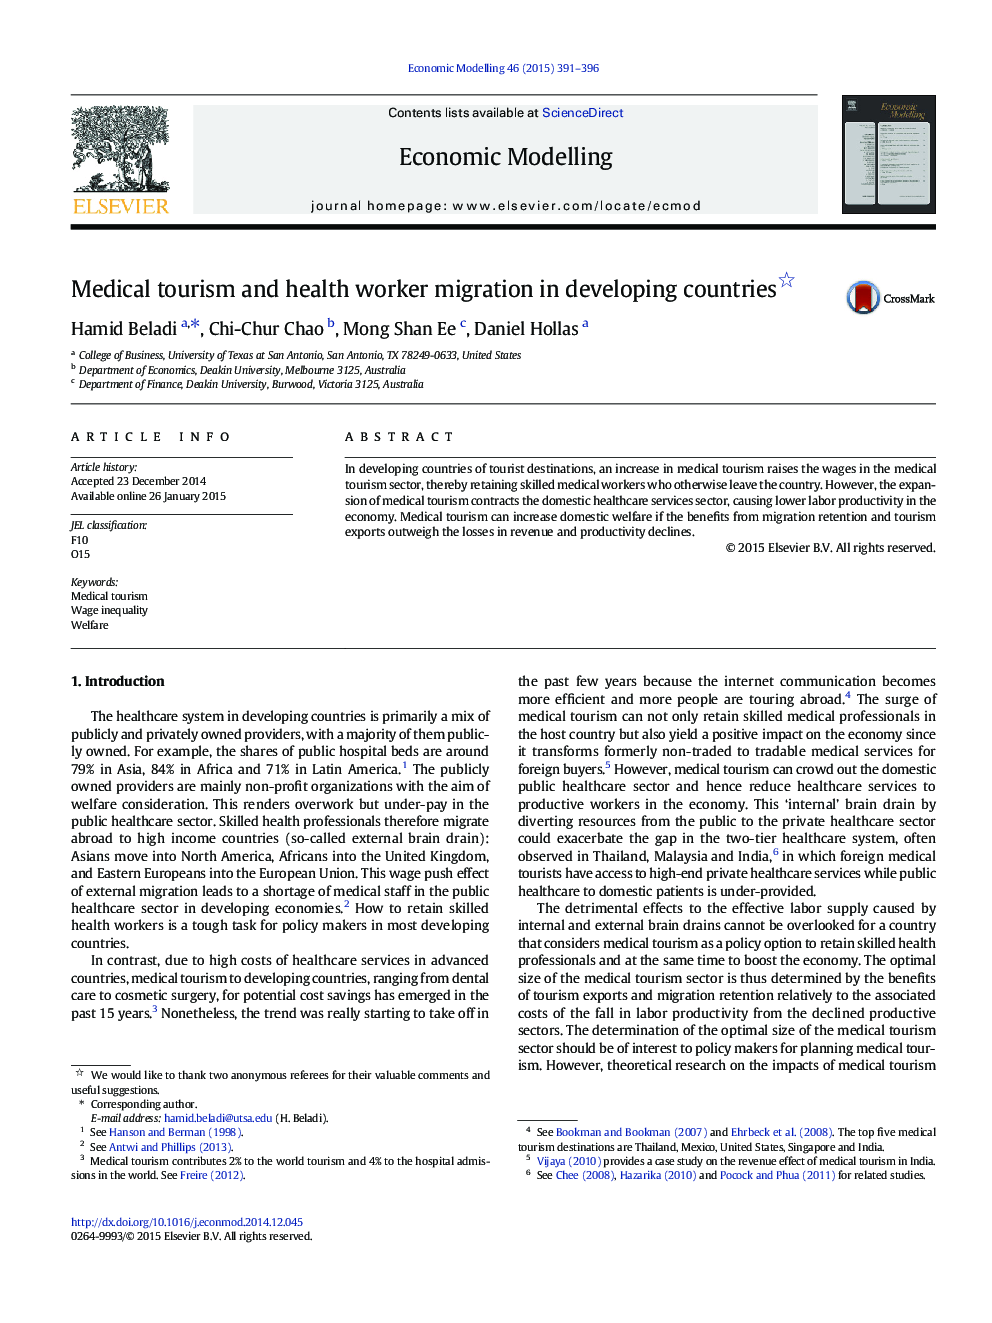 Medical tourism and health worker migration in developing countries